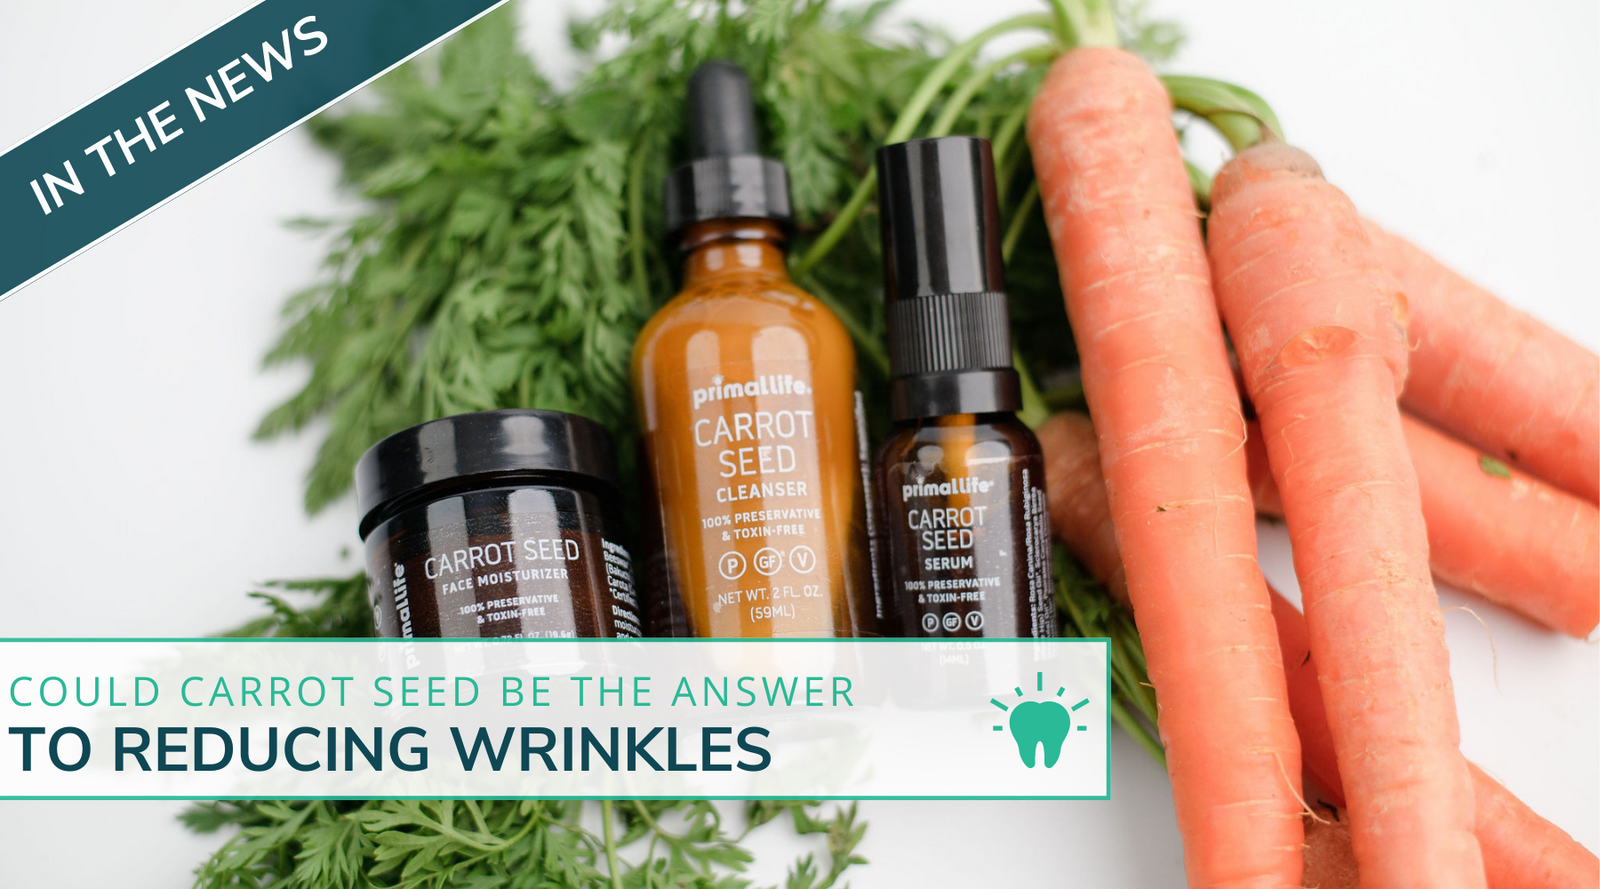 Could Carrot Seed Be The Answer To Reducing Wrinkles?